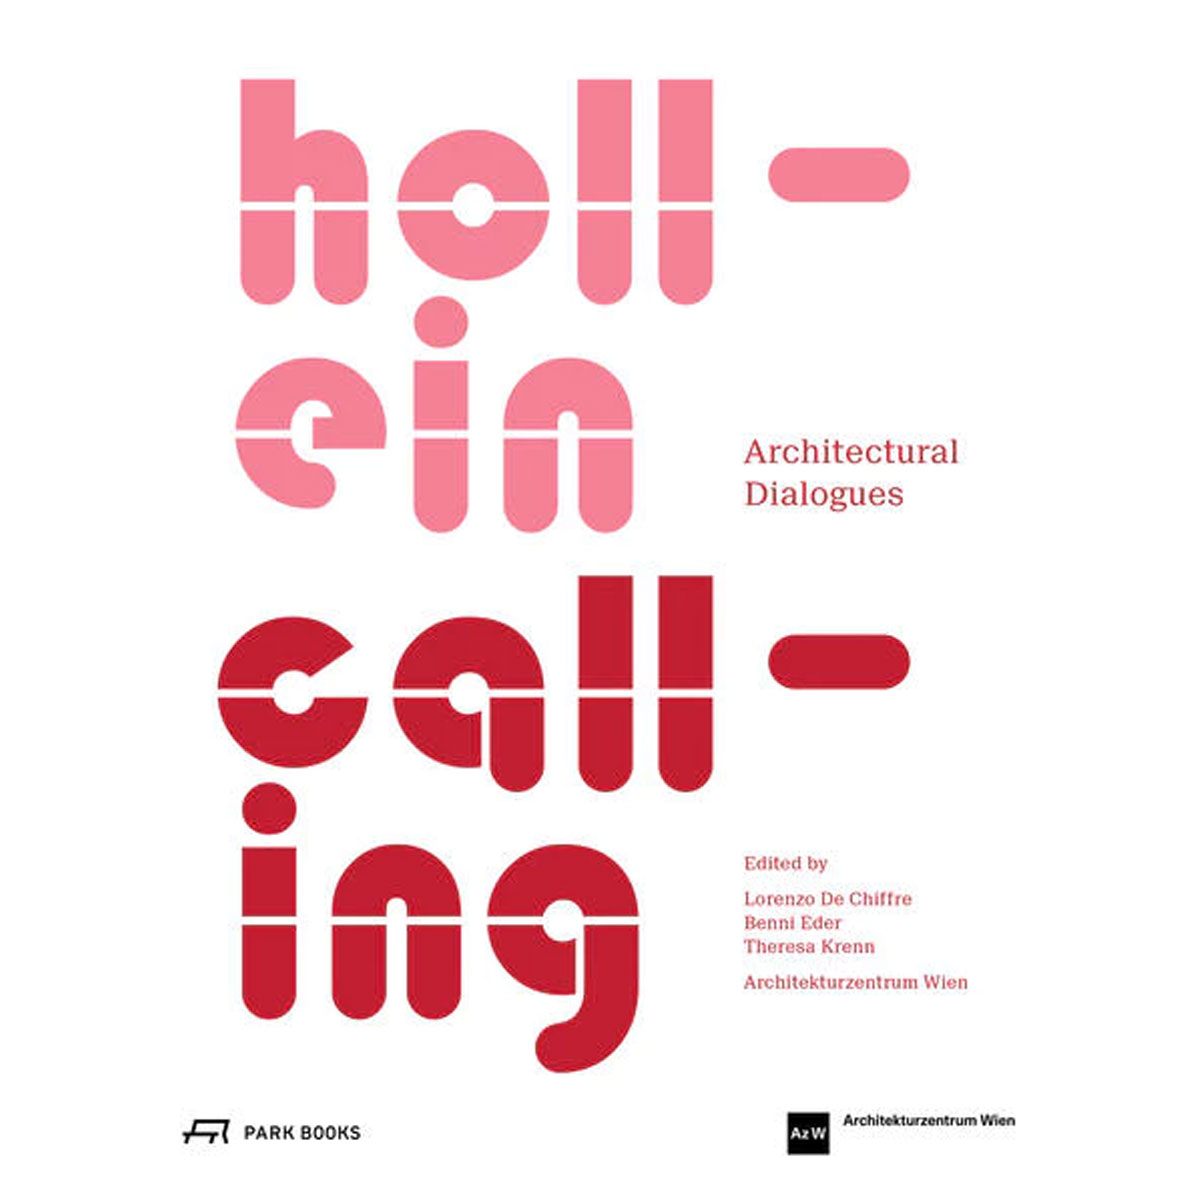 Hollein Calling Architectural Dialogues